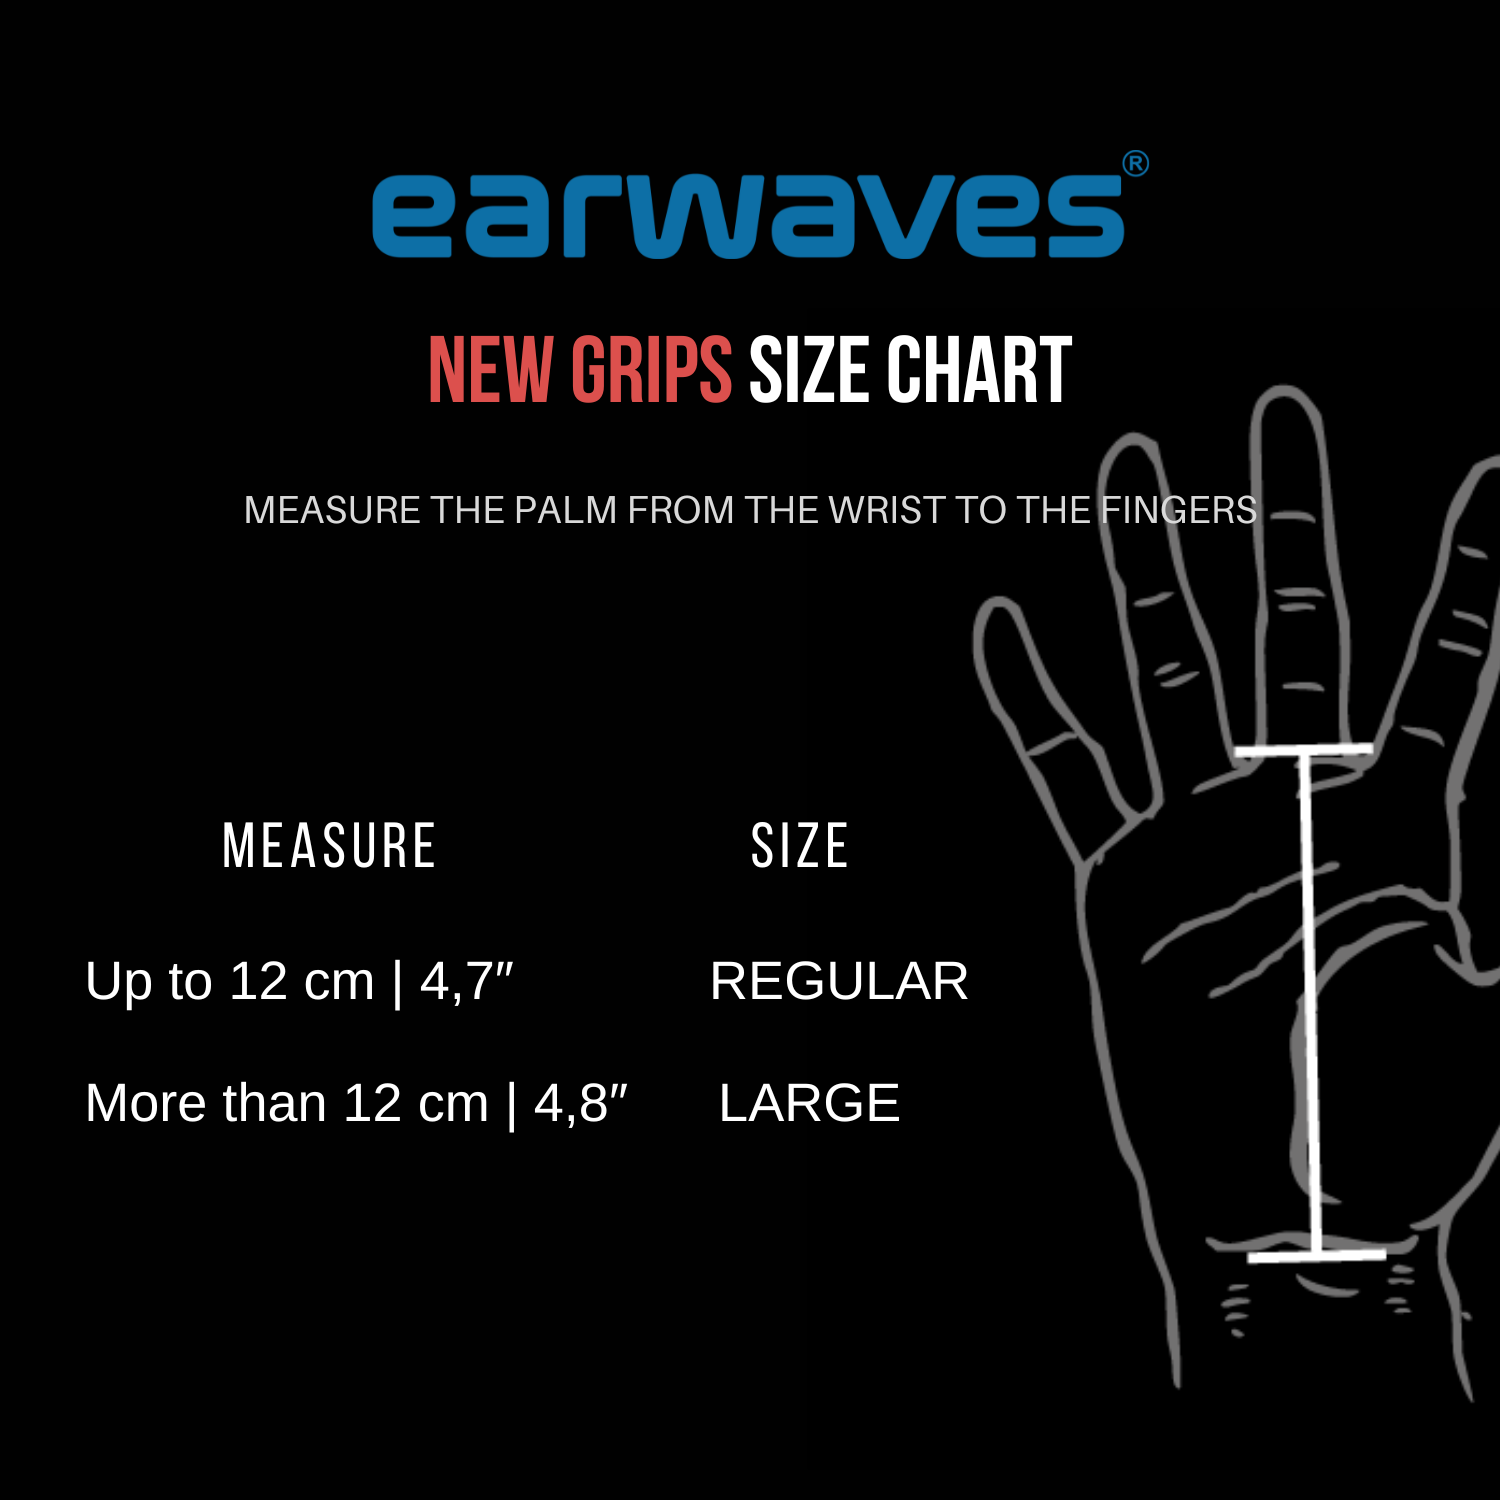 earwaves gloves sizing chart